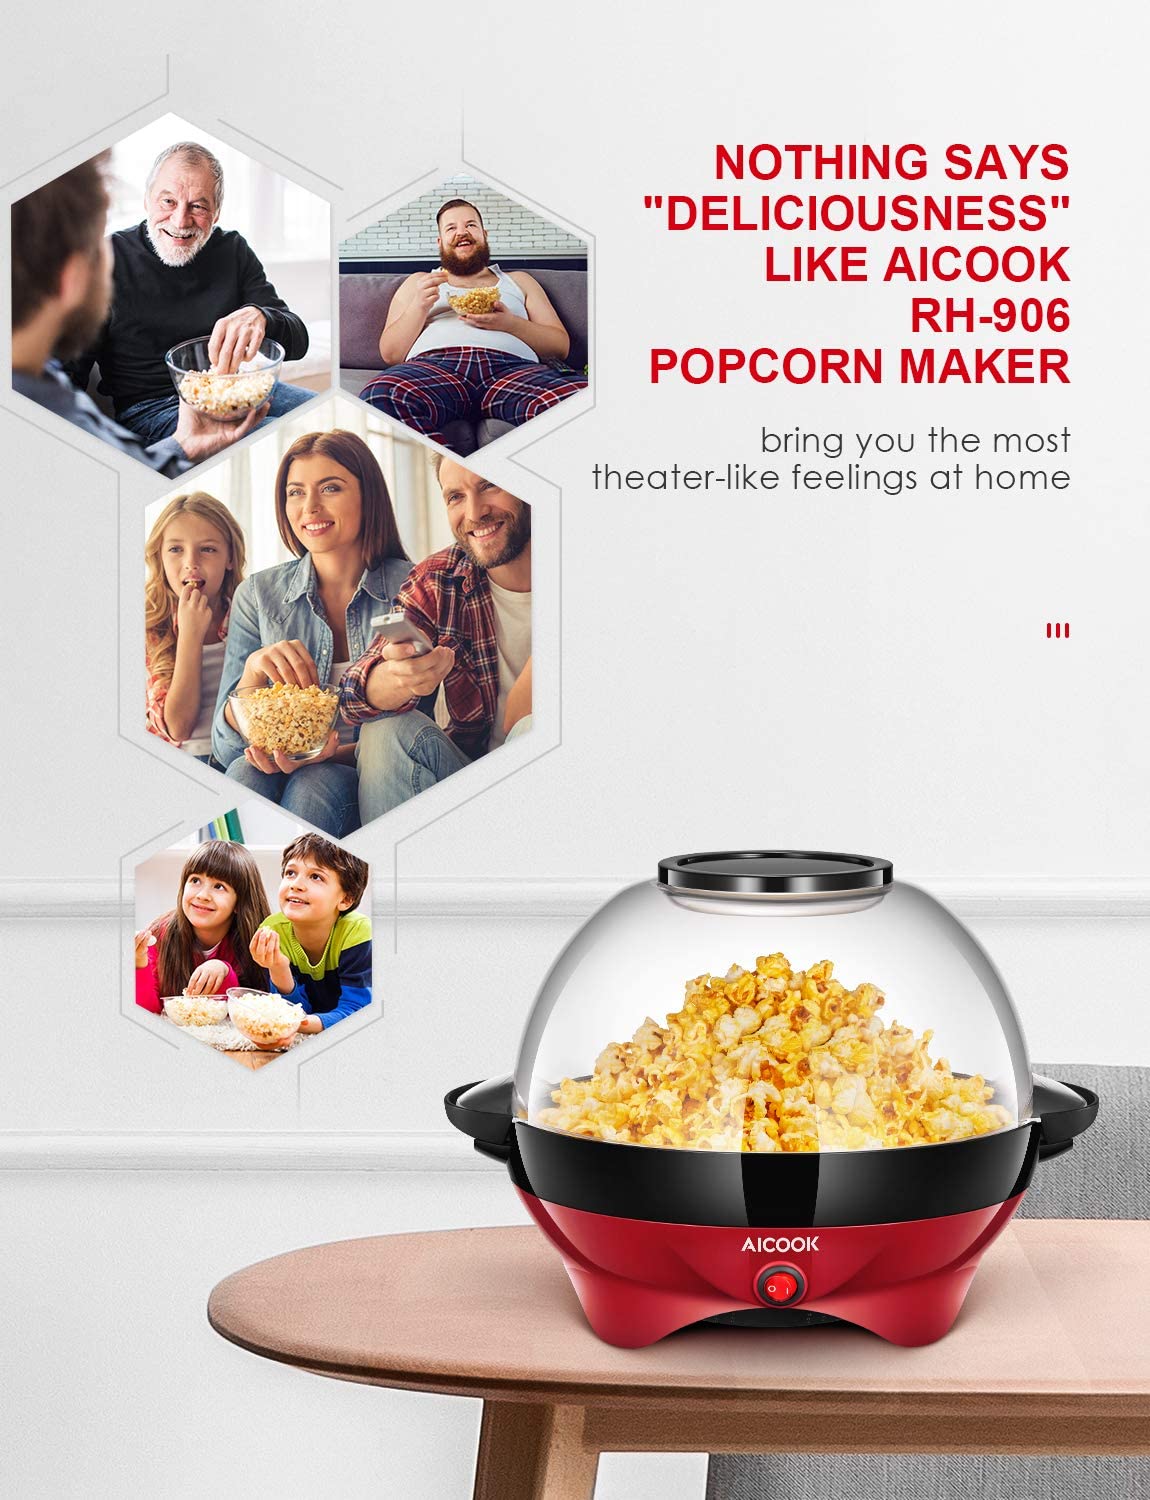 AICOOK Vintage Style Popcorn Maker, Suitable for Movie Night